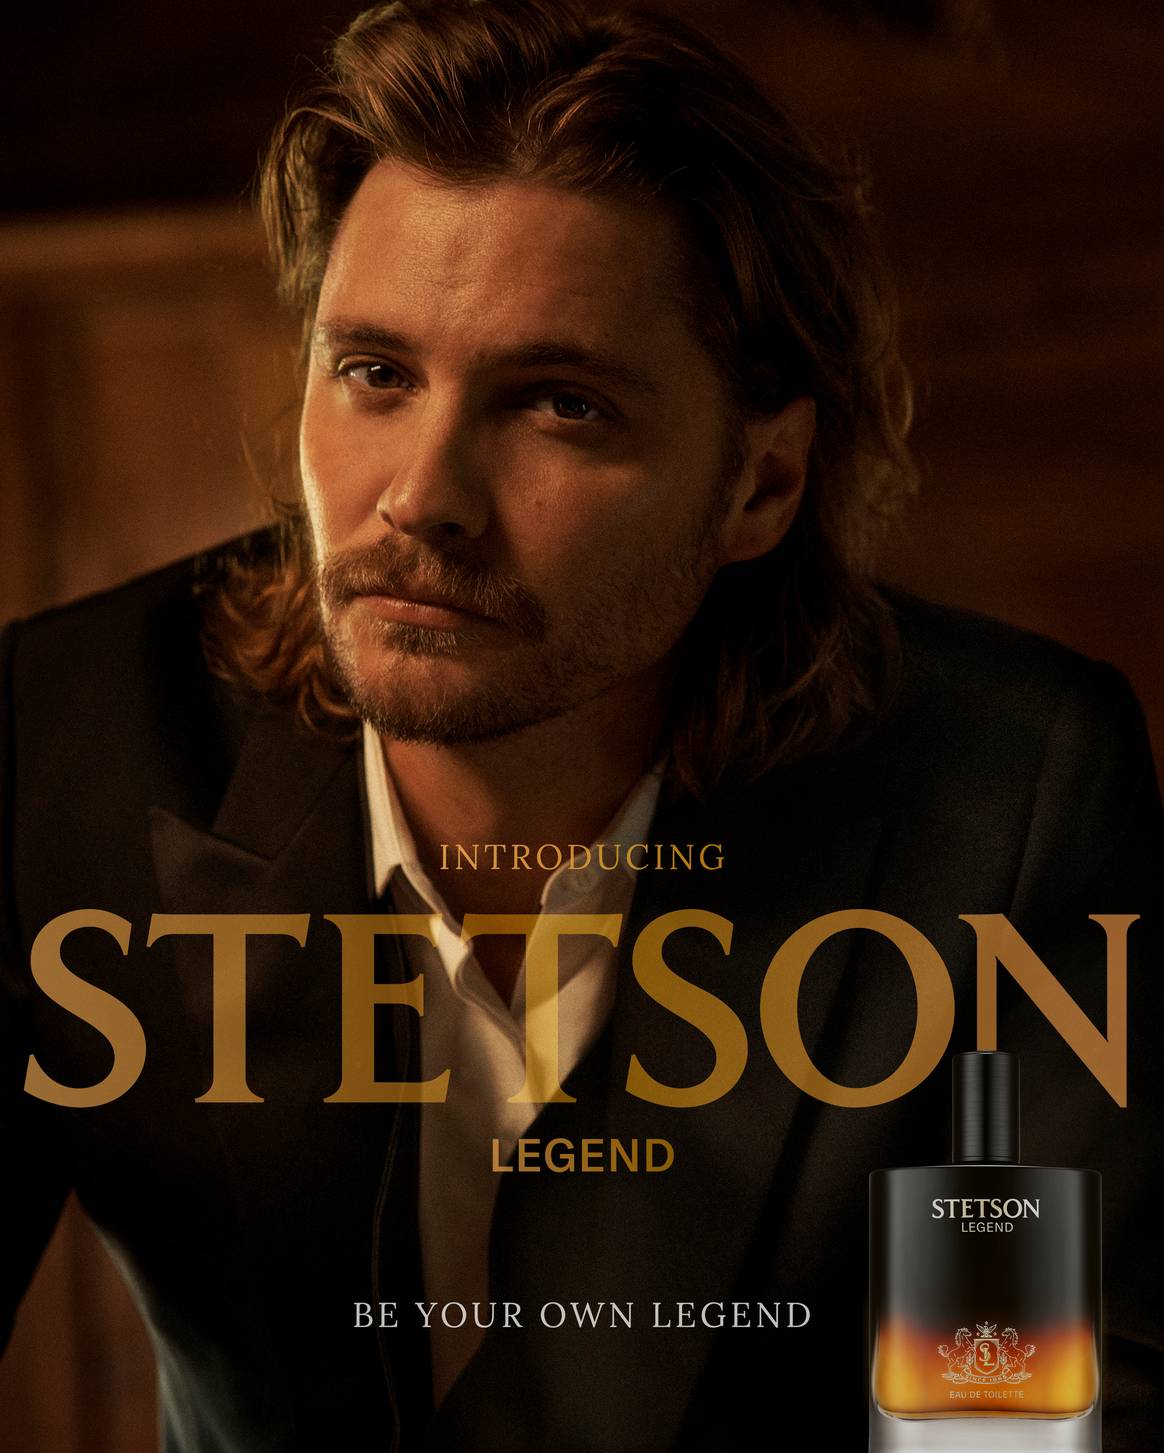 ‘Stetson Legend’ fragrance campaign fronted by Stetson brand ambassador and actor Luke Grimes